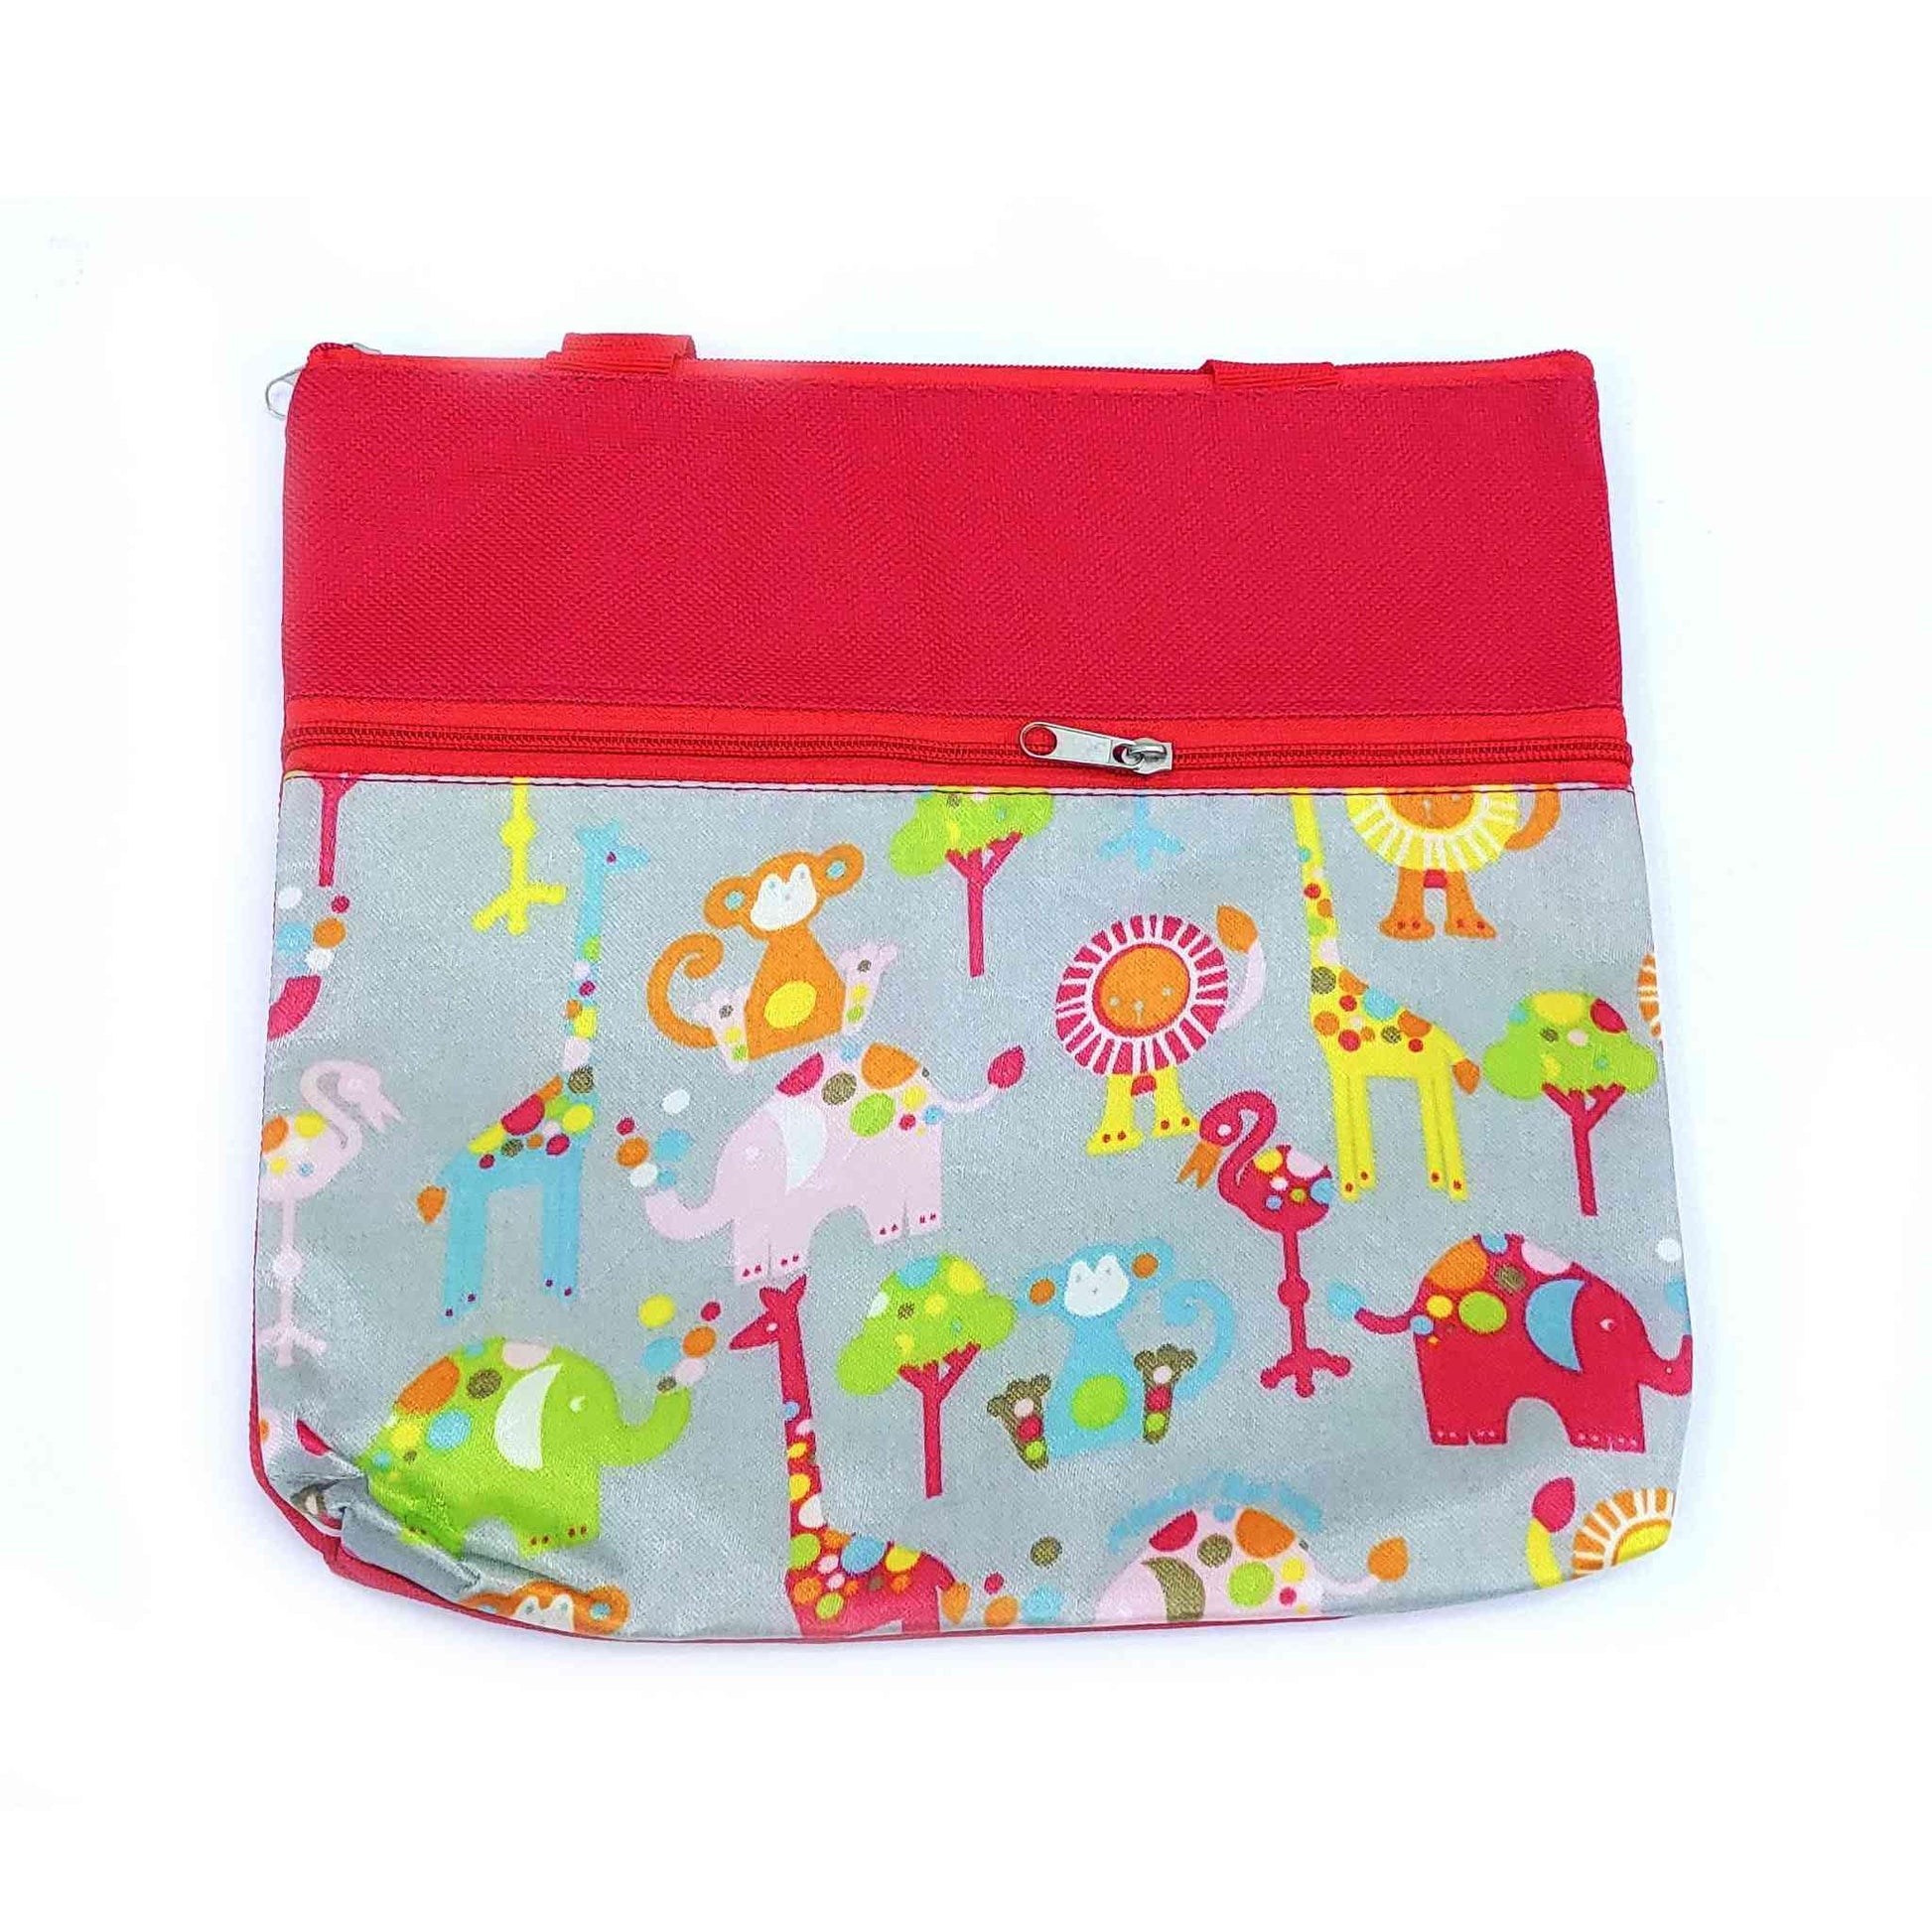 Imported Durable Canvas Printed multi purpose utility Medium size Bag with handles for all occasions for the girls and ladies, Design 5, Red - Indian Petals